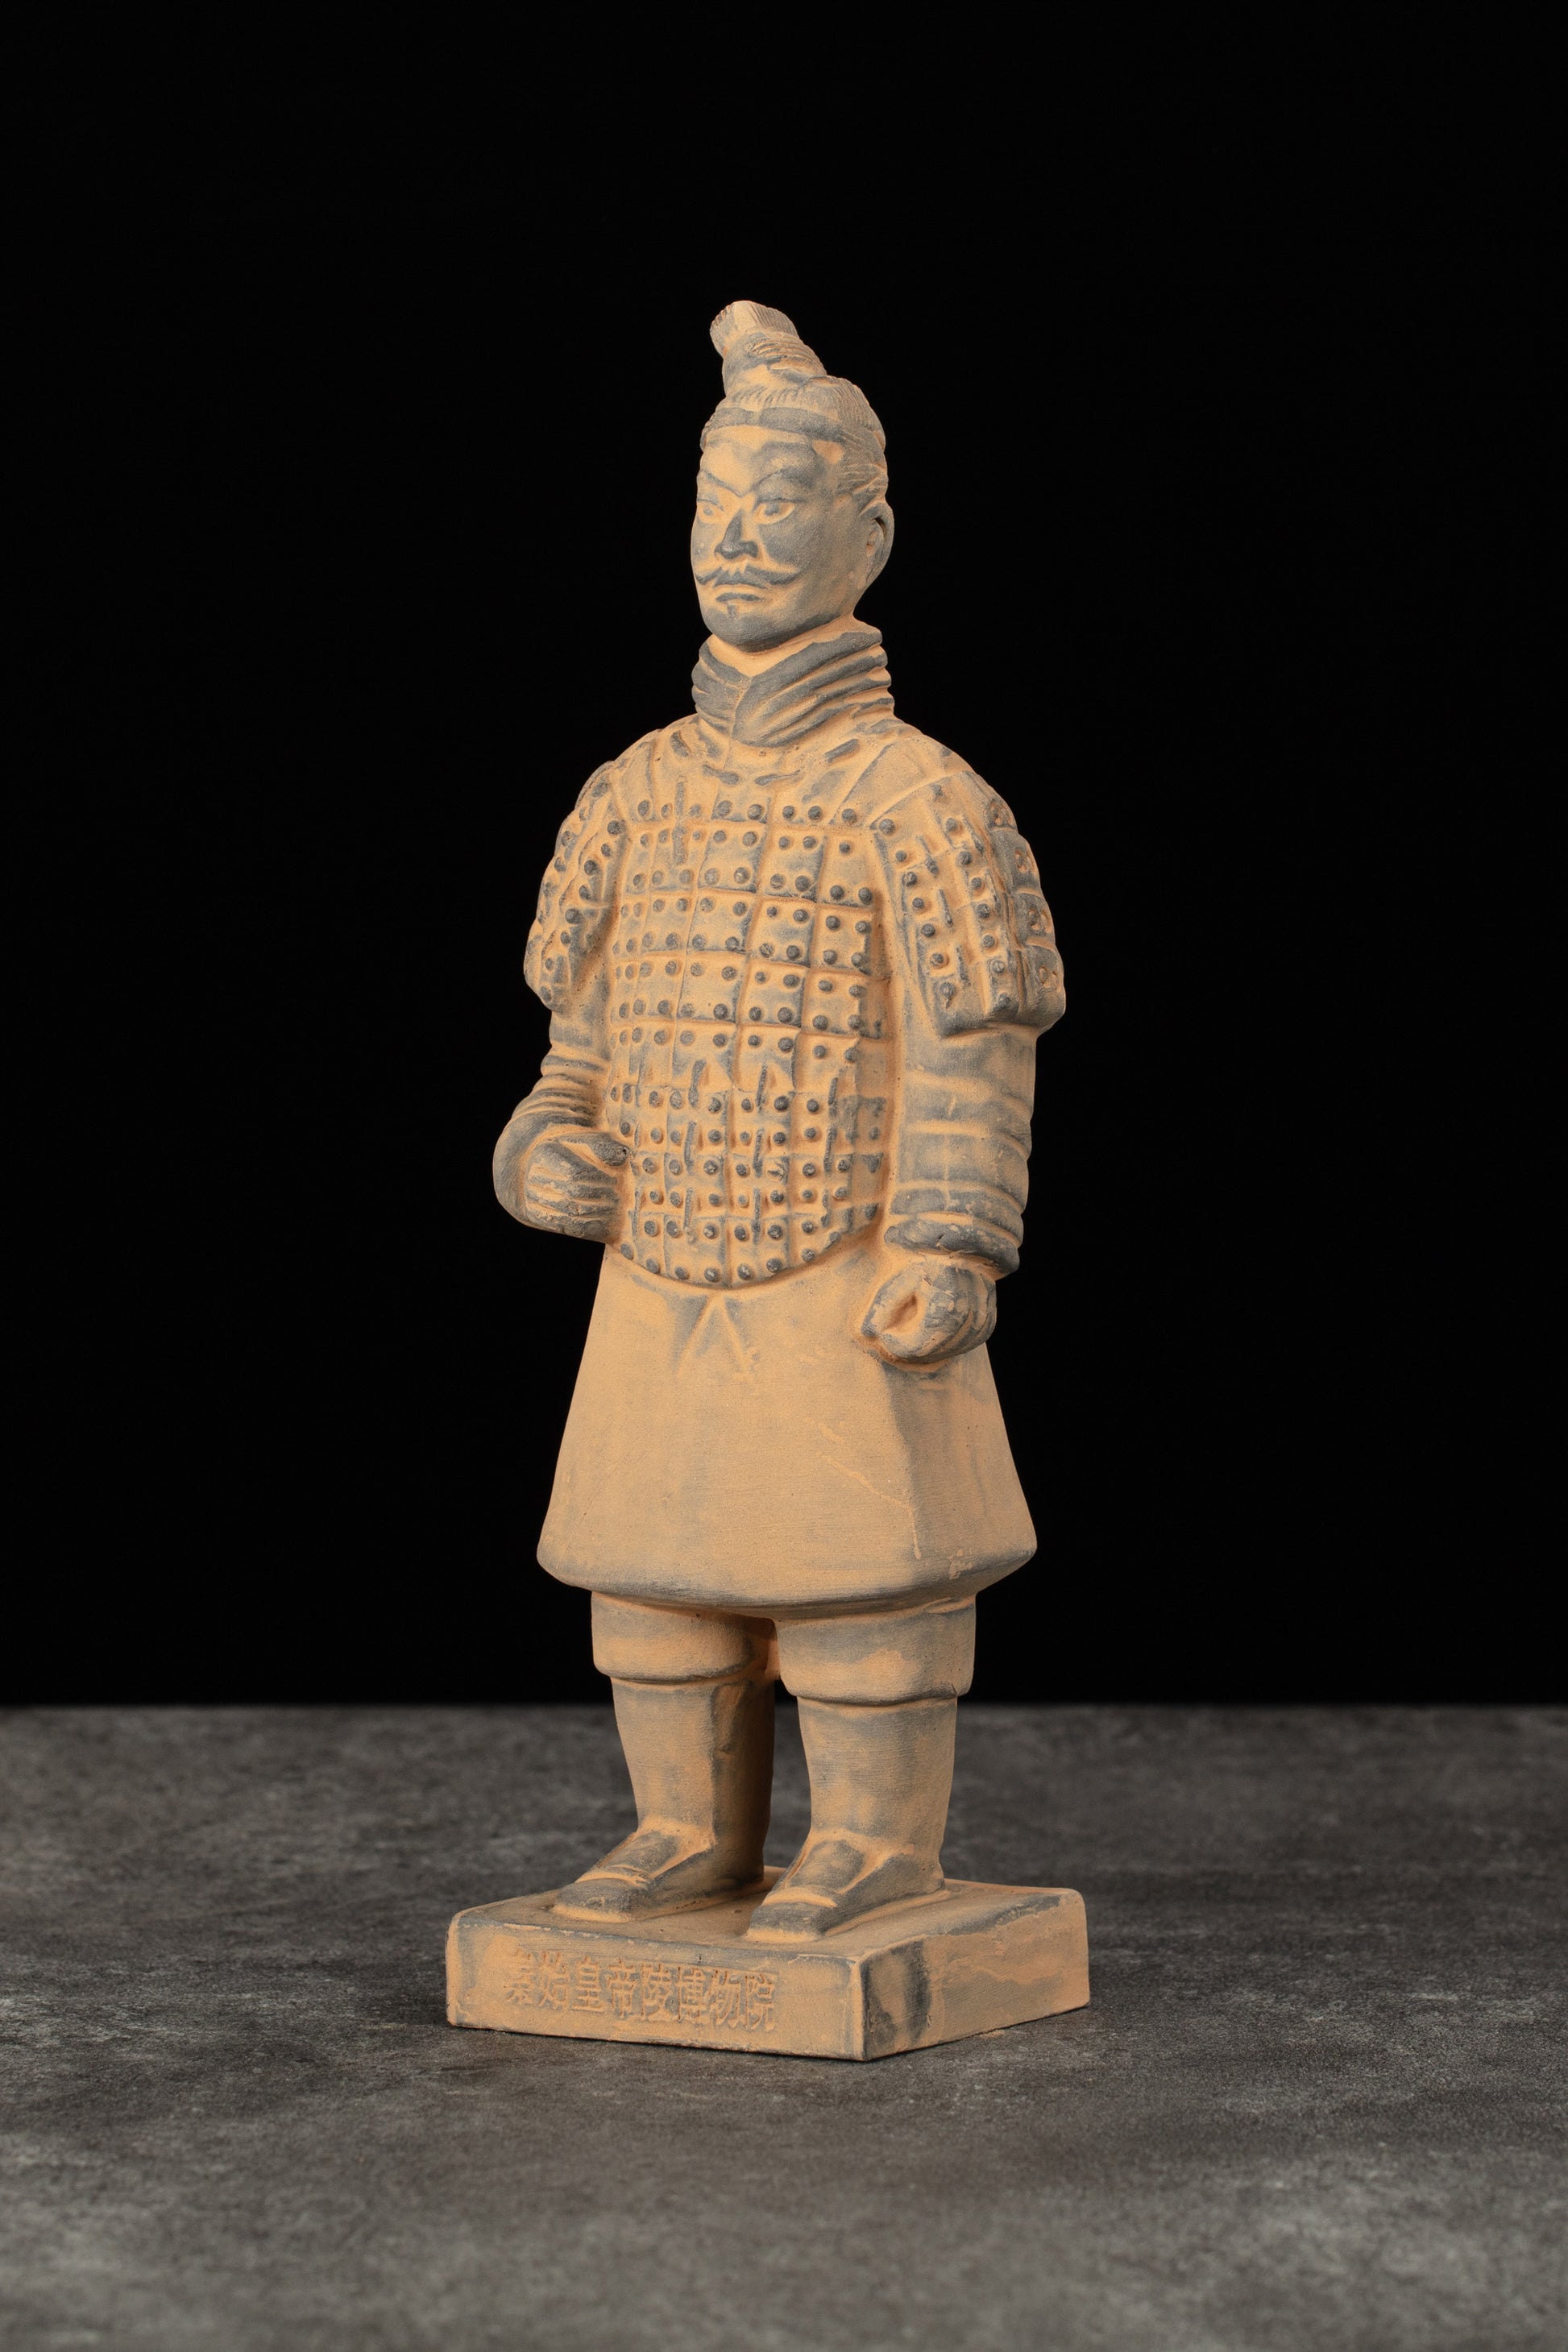 20CM Soldier - CLAYARMY-20CM Common Soldier Side View